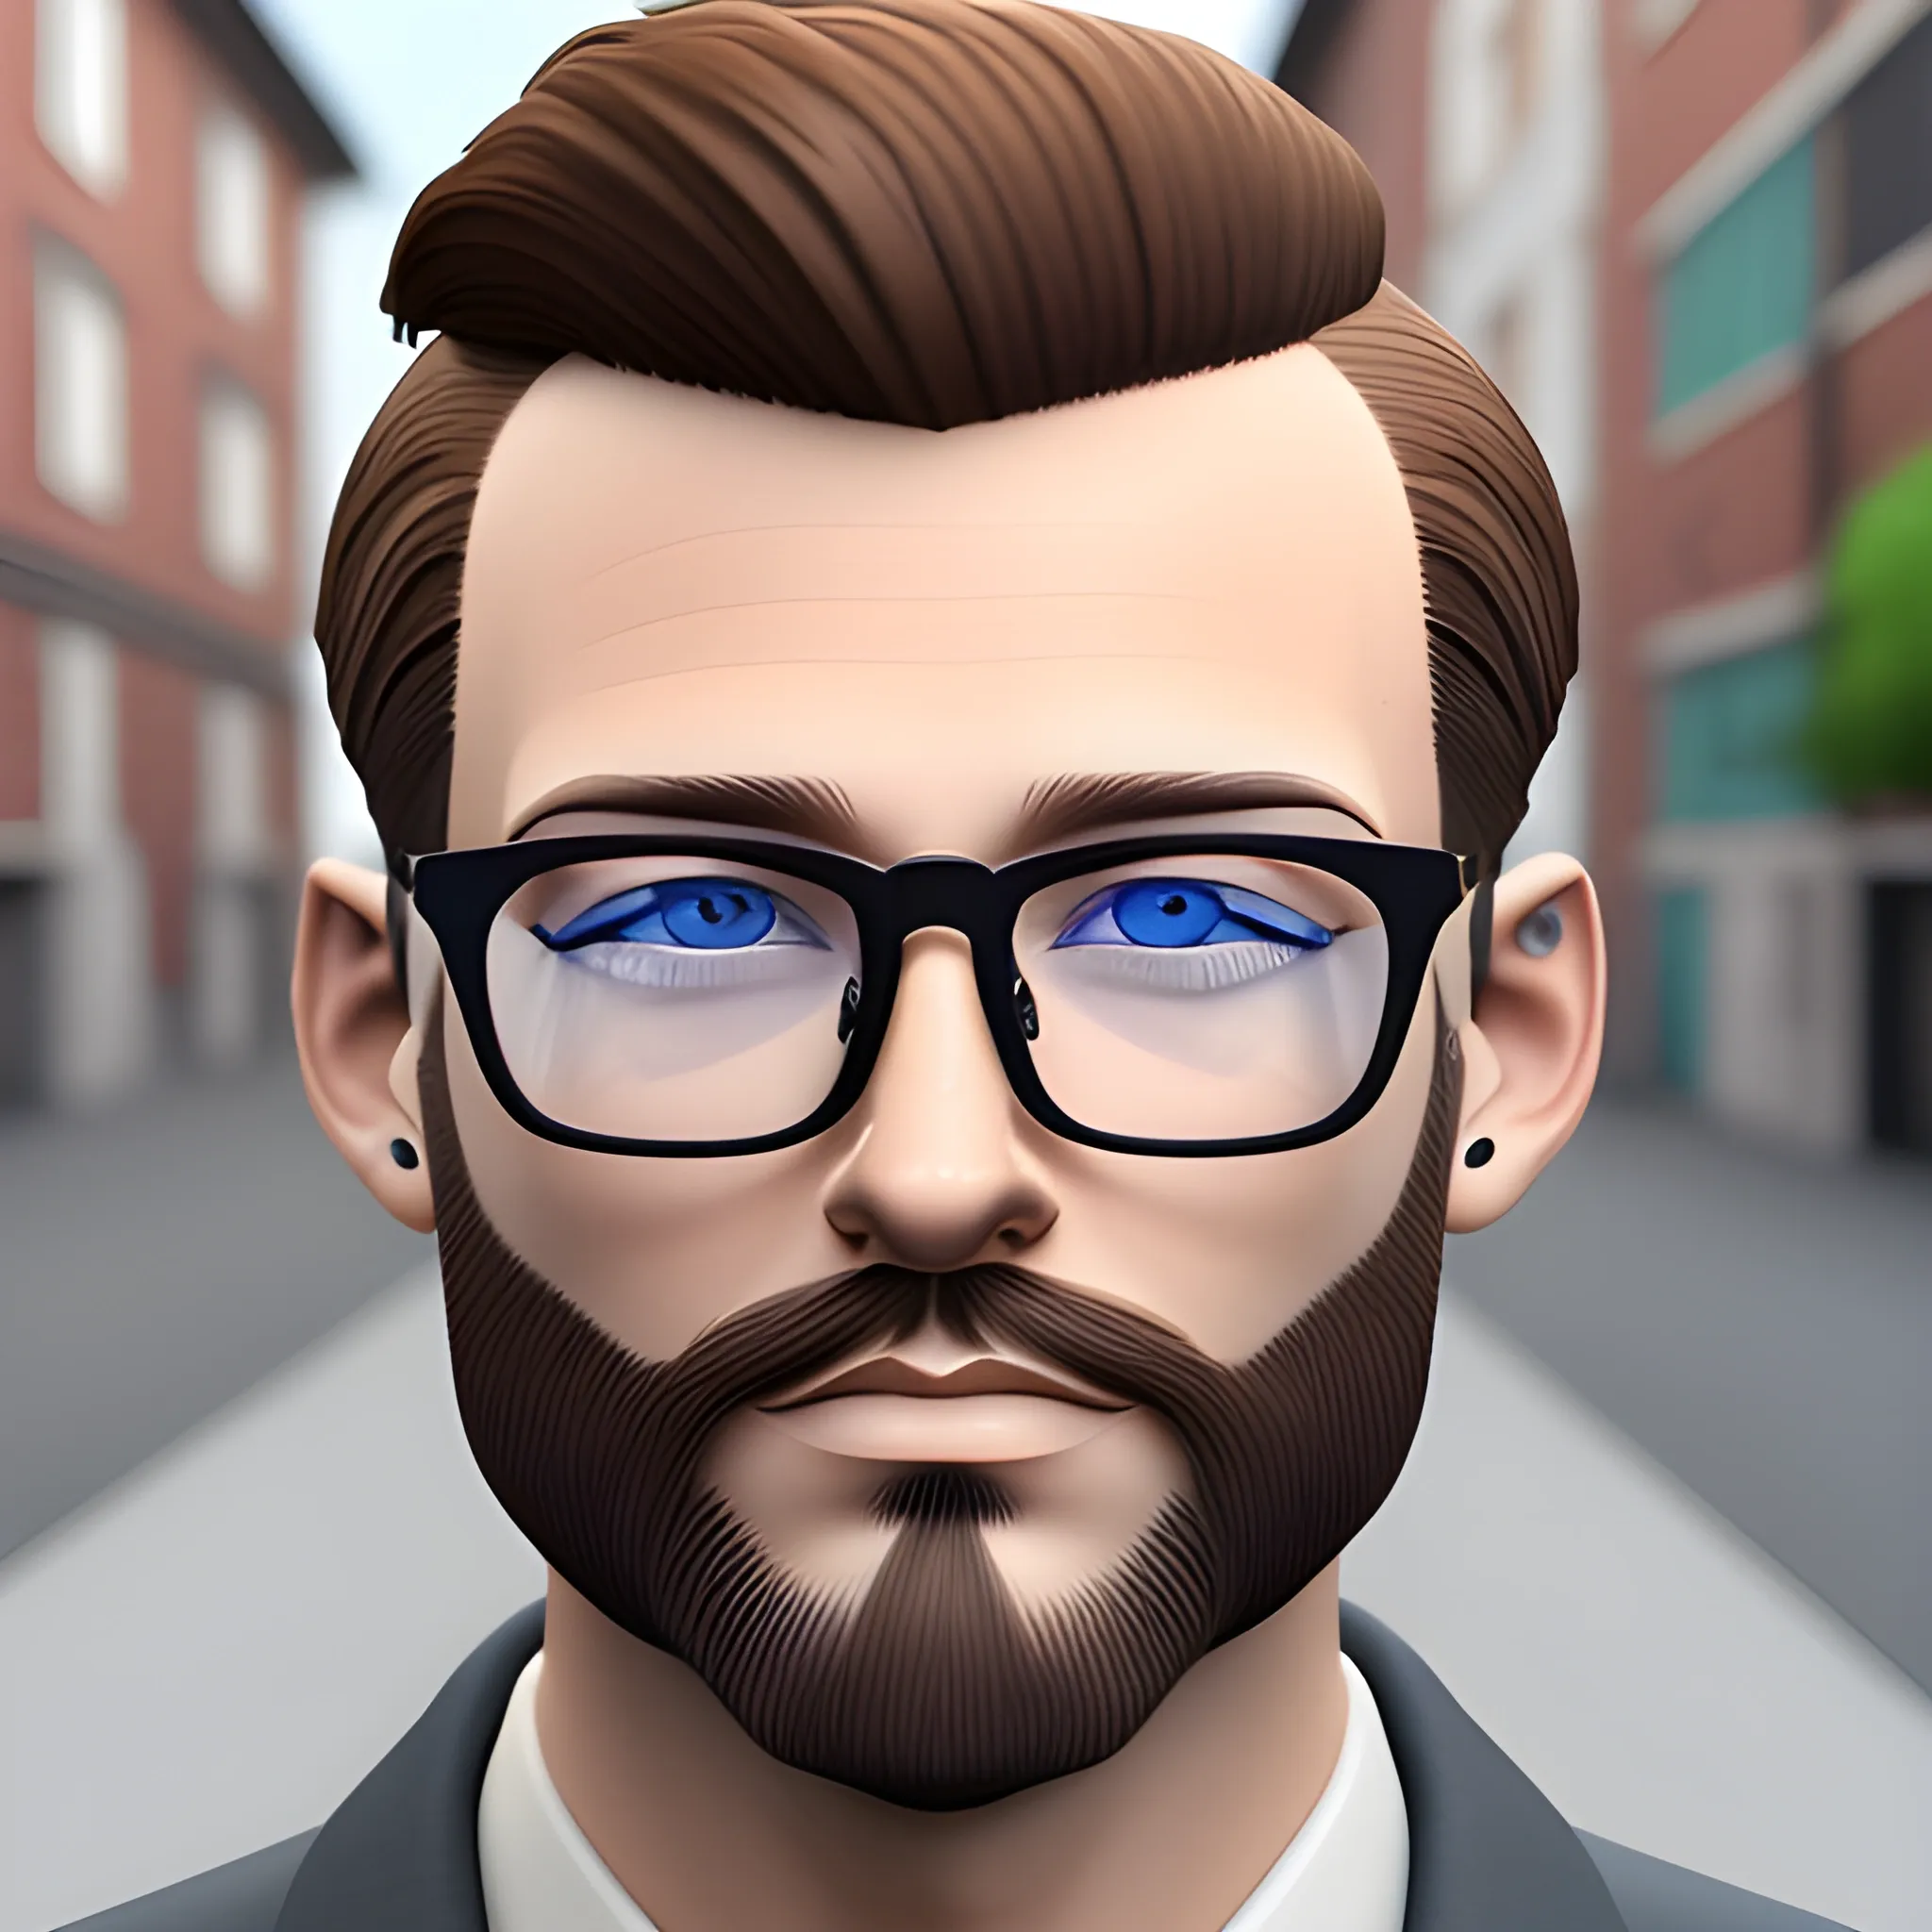 
, 3D  a man with shaved brown hair, beard and glasses. blue eyes. realistic and urban style

